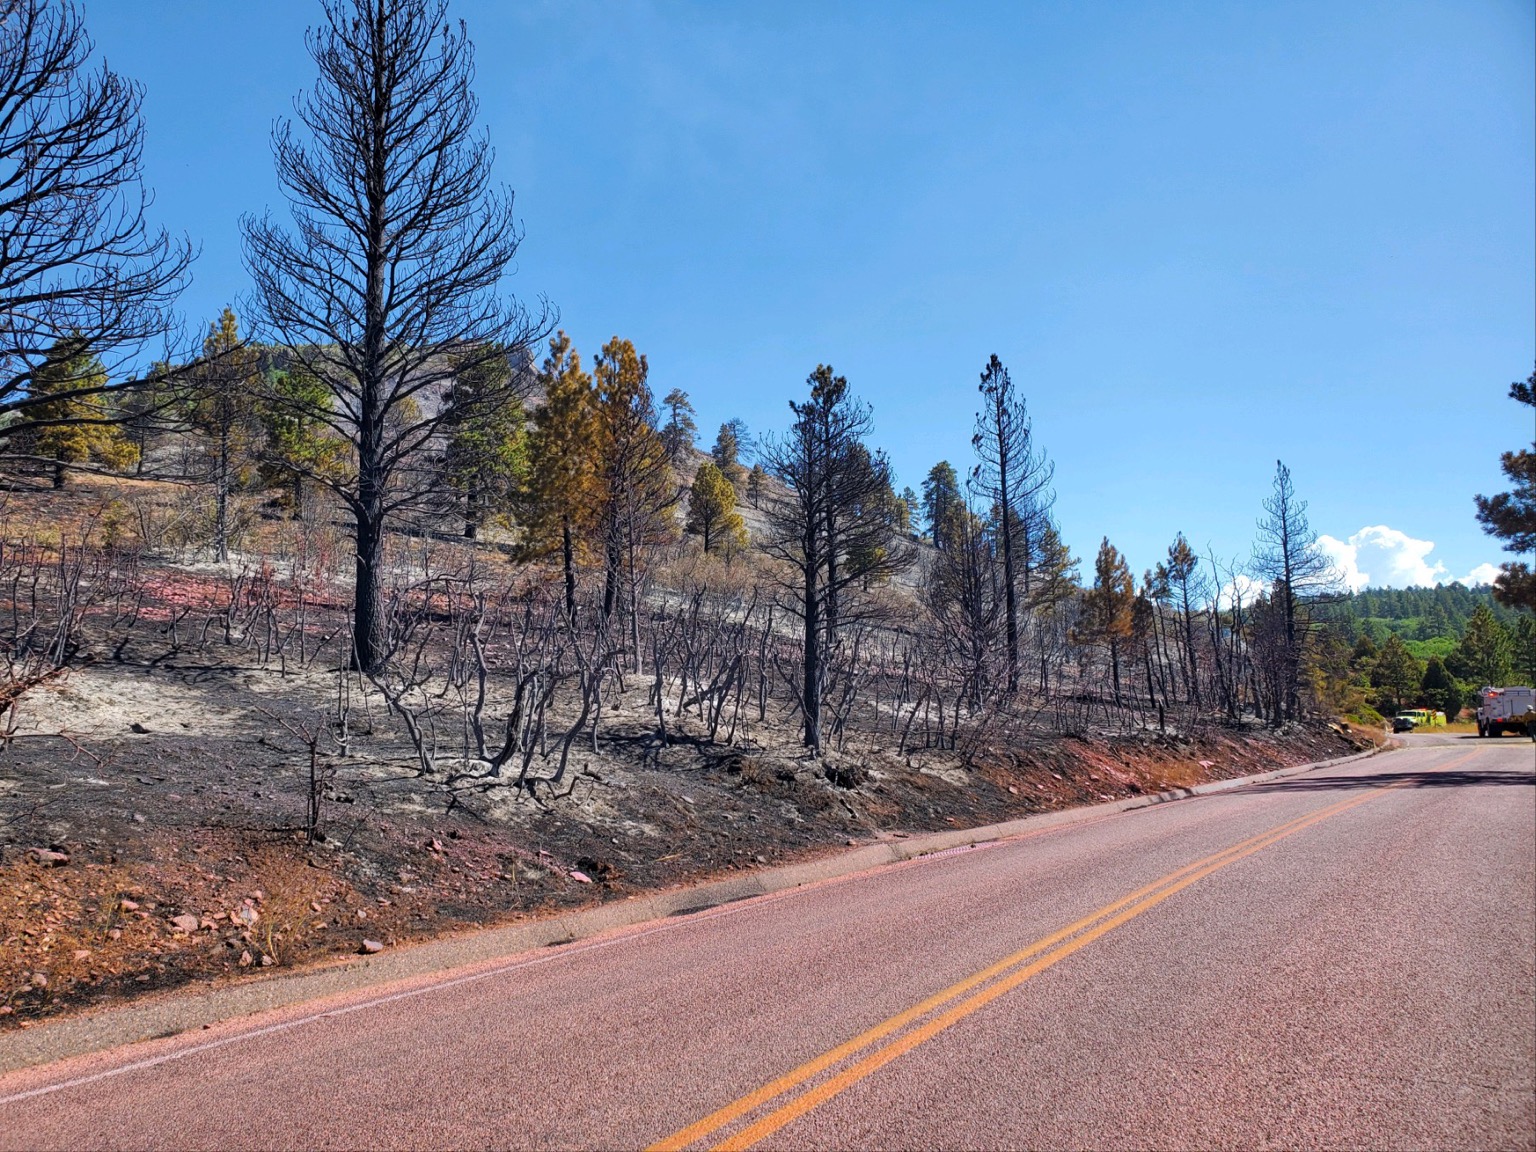 Burned vegetation on a hill along the Kolob Terrace Road in Zion National Park.